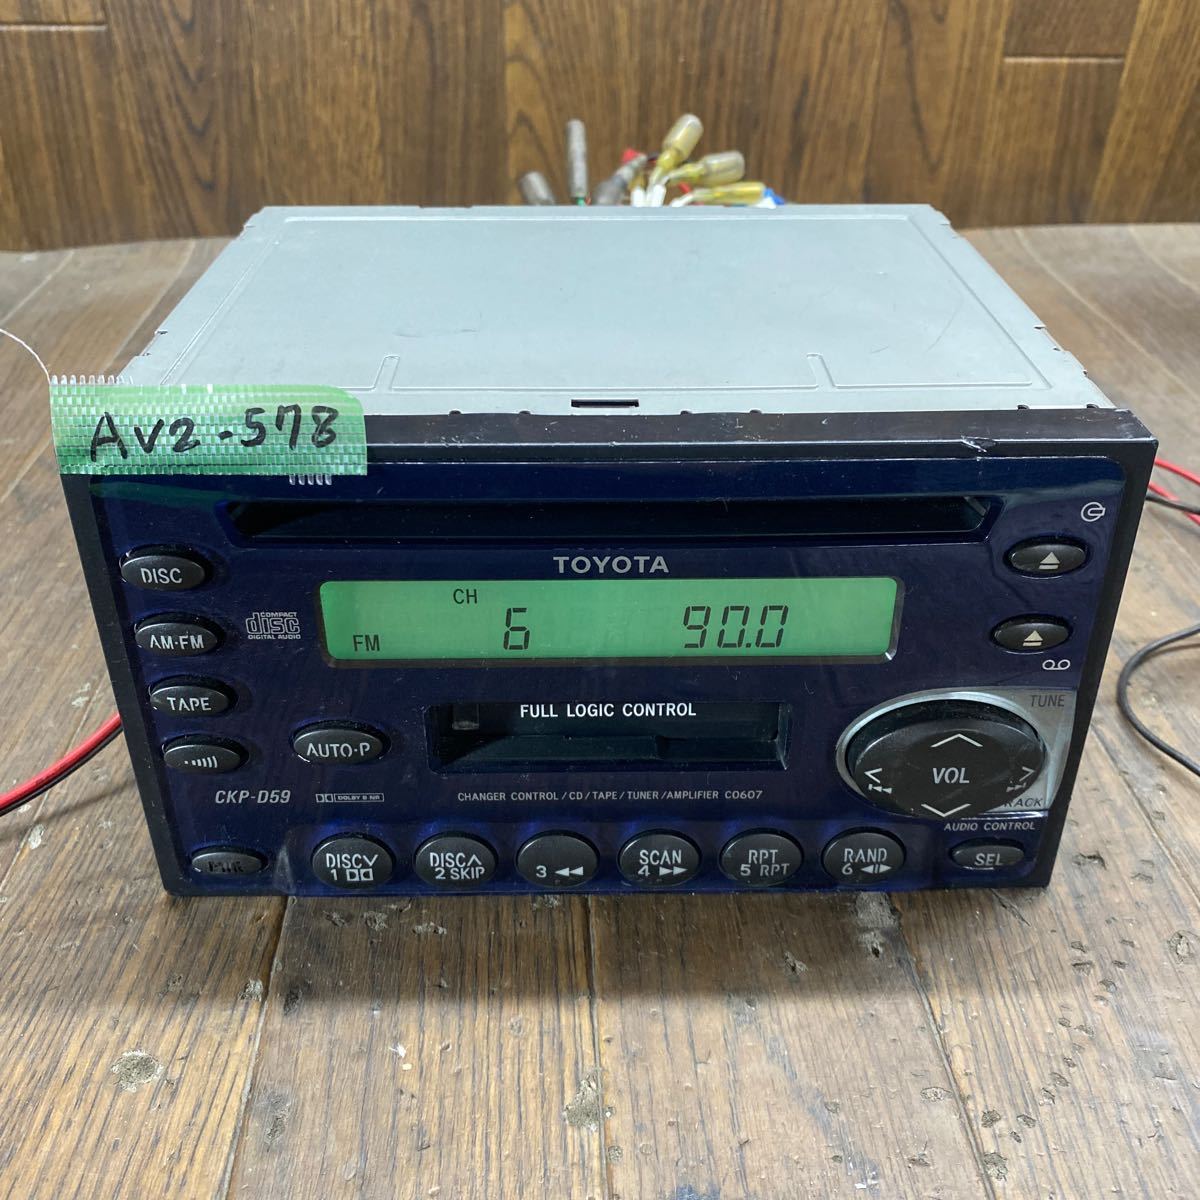 AV2-578 super-discount car stereo TOYOTA 08600-00024 Pioneer FH-M8246zt TK038536 CD cassette FM/AM body only simple operation verification ending used present condition goods 